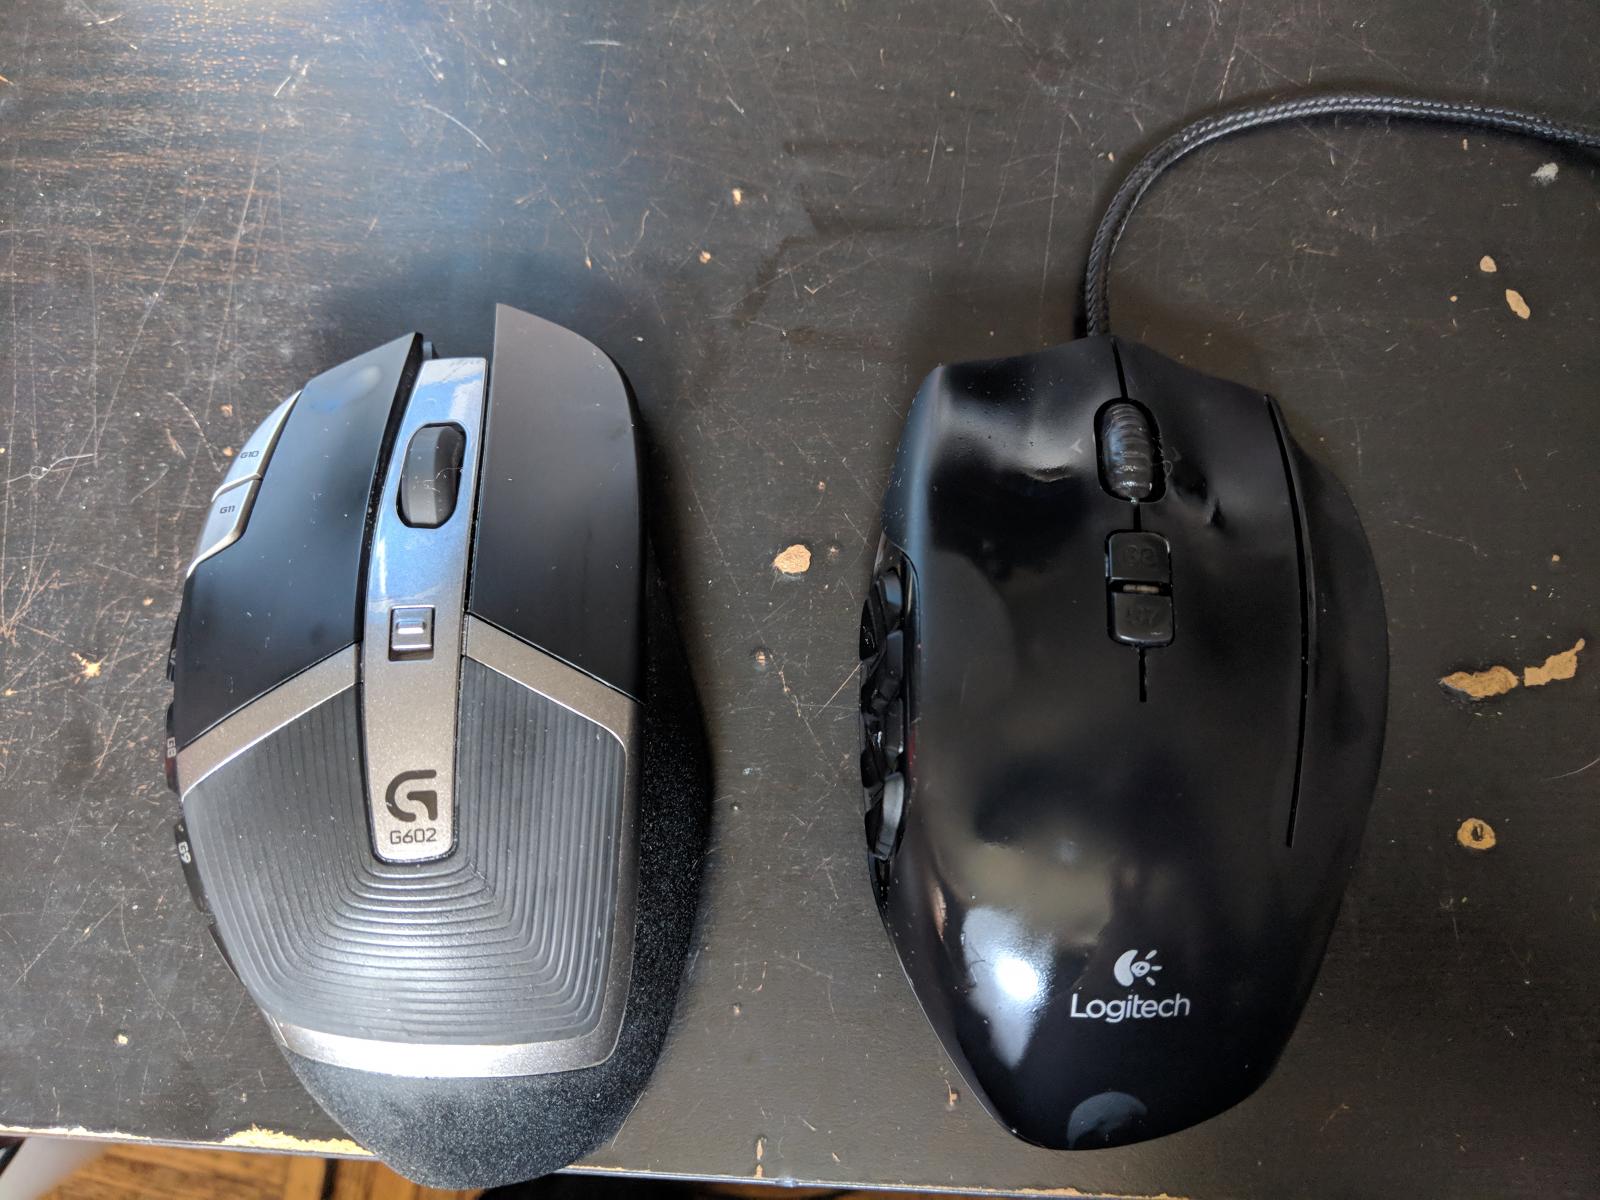 For sale Logitech G600 MMO Gaming Mouse